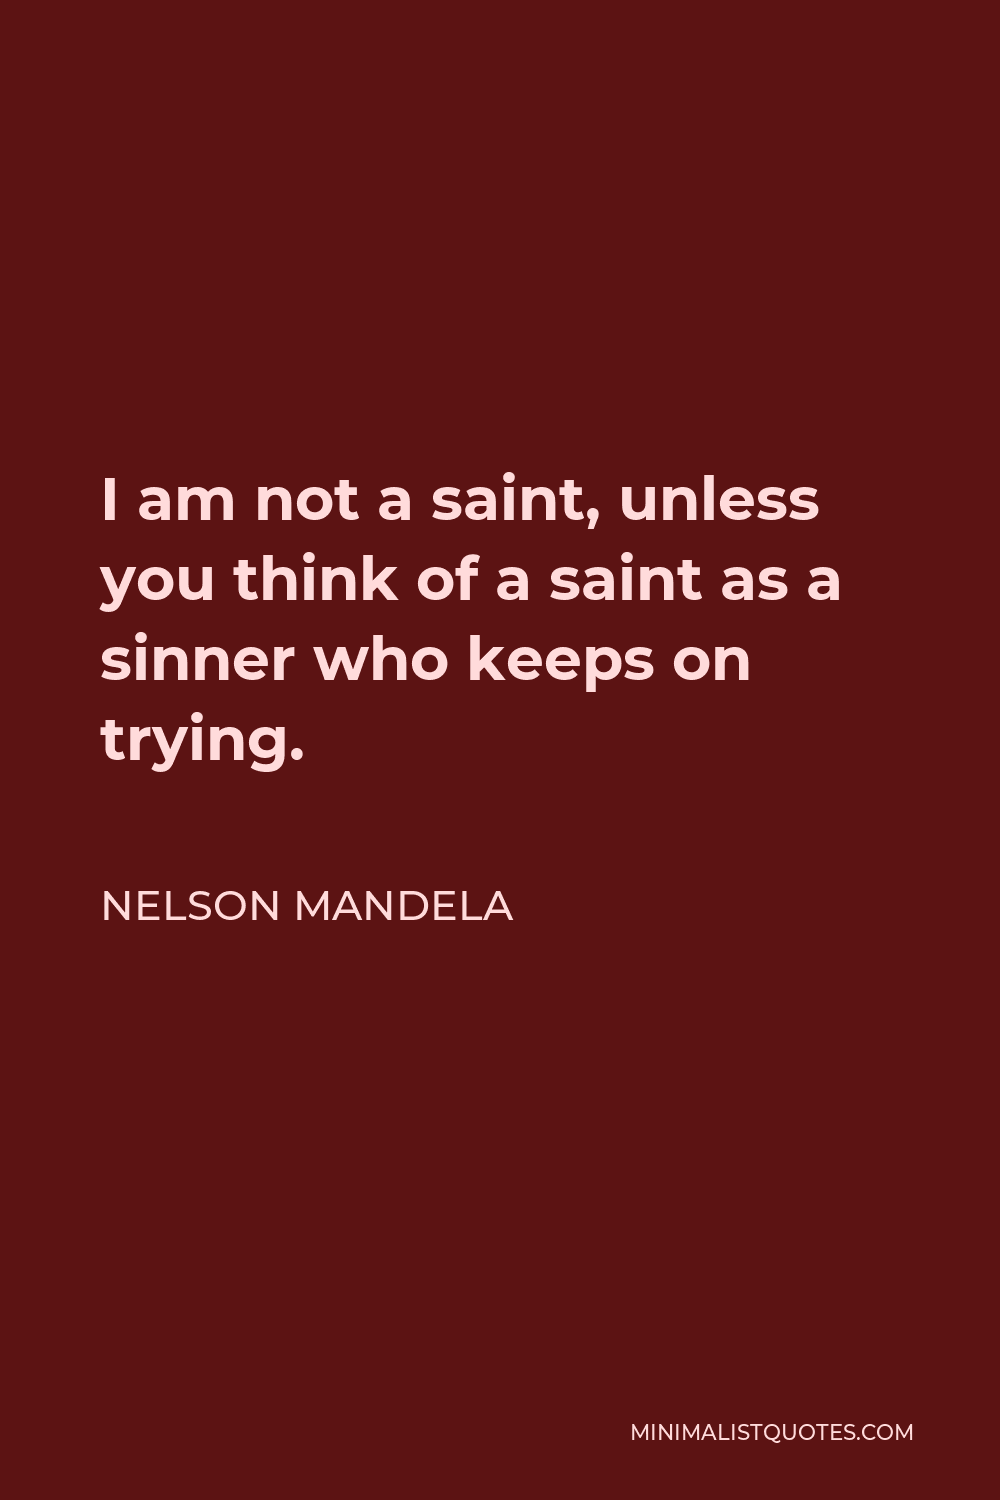 Nelson Mandela Quote - I am not a saint, unless you think of a saint as a sinner who keeps on trying.